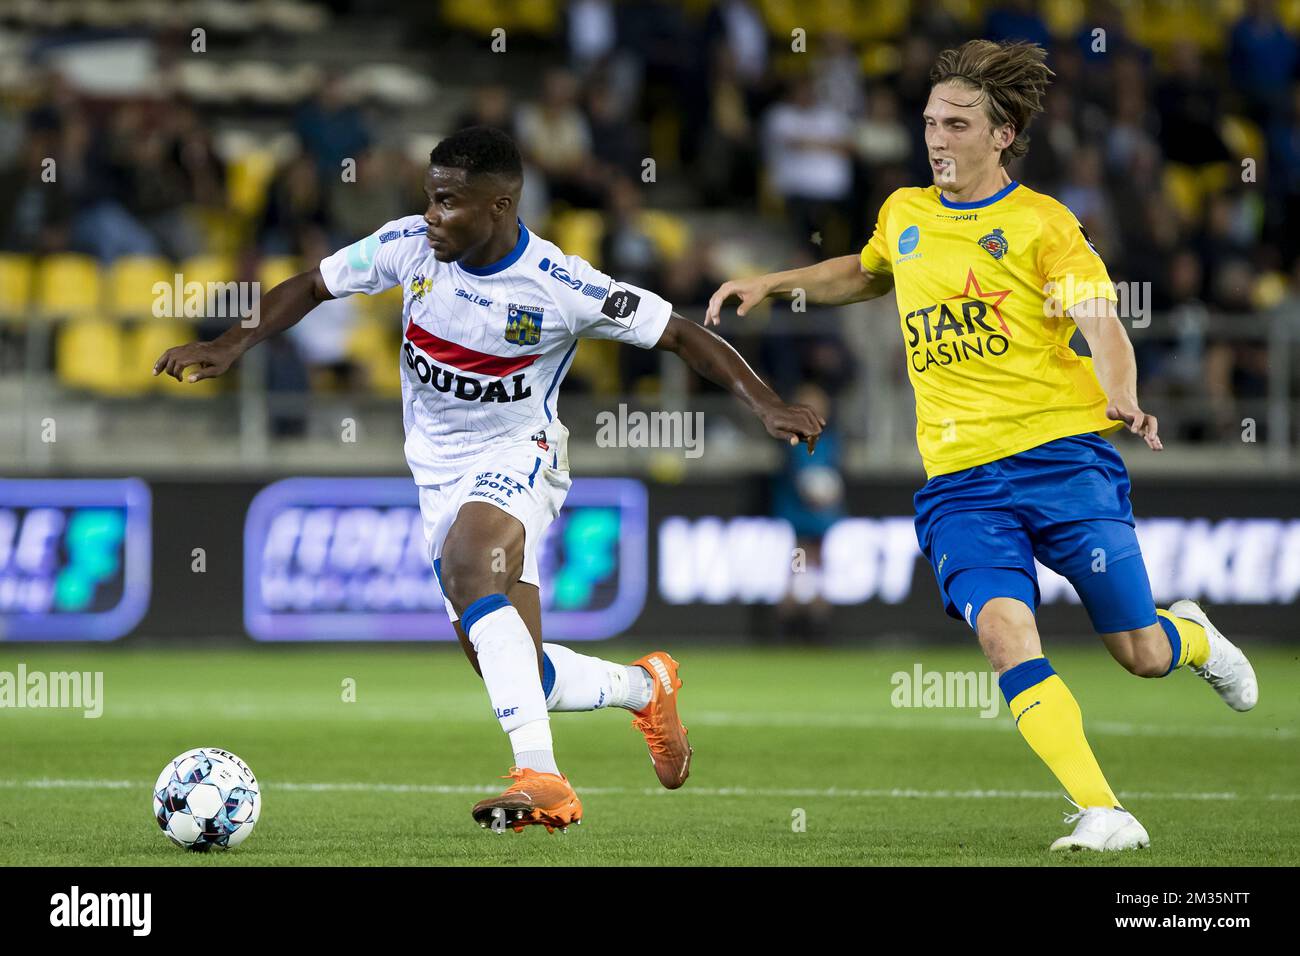 Westerlo's Kouya Mabea and Waasland-Beveren's Joan Simun Edmundsson pictured in action during a soccer match between Waasland-Beveren and KVC Westerlo, Sunday 12 September 2021 in , on day 4 of the '1B Pro League' second division of the Belgian soccer championship. BELGA PHOTO KRISTOF VAN ACCOM Stock Photo